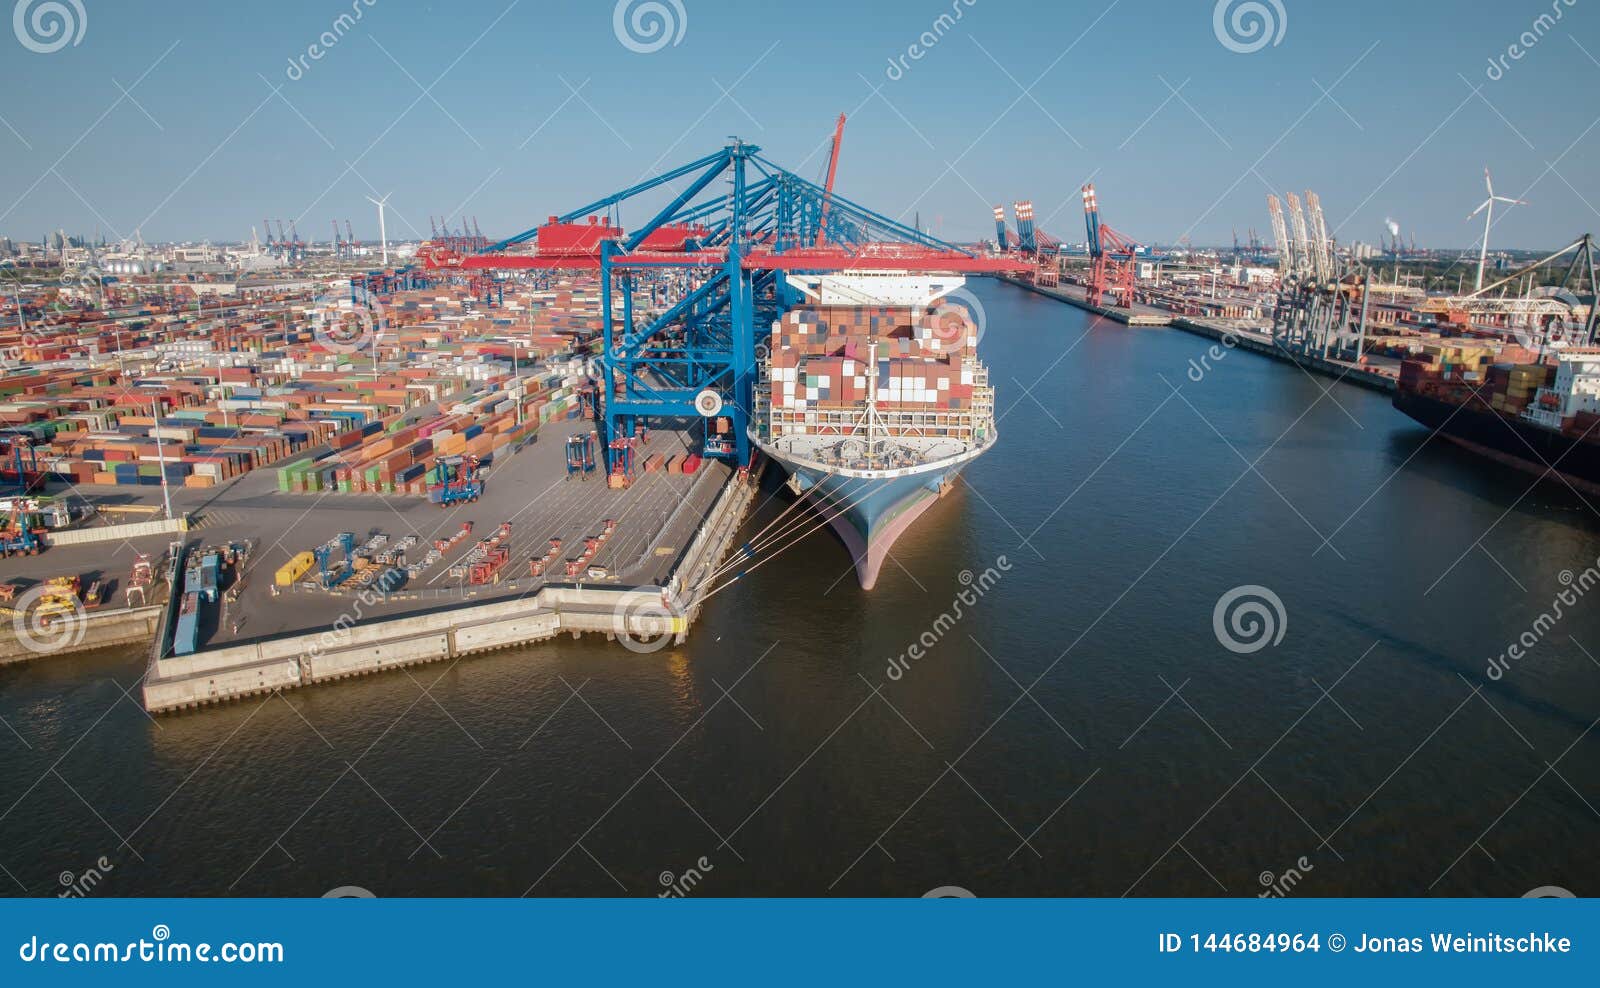 aerialview of container terminal in port of hamburg